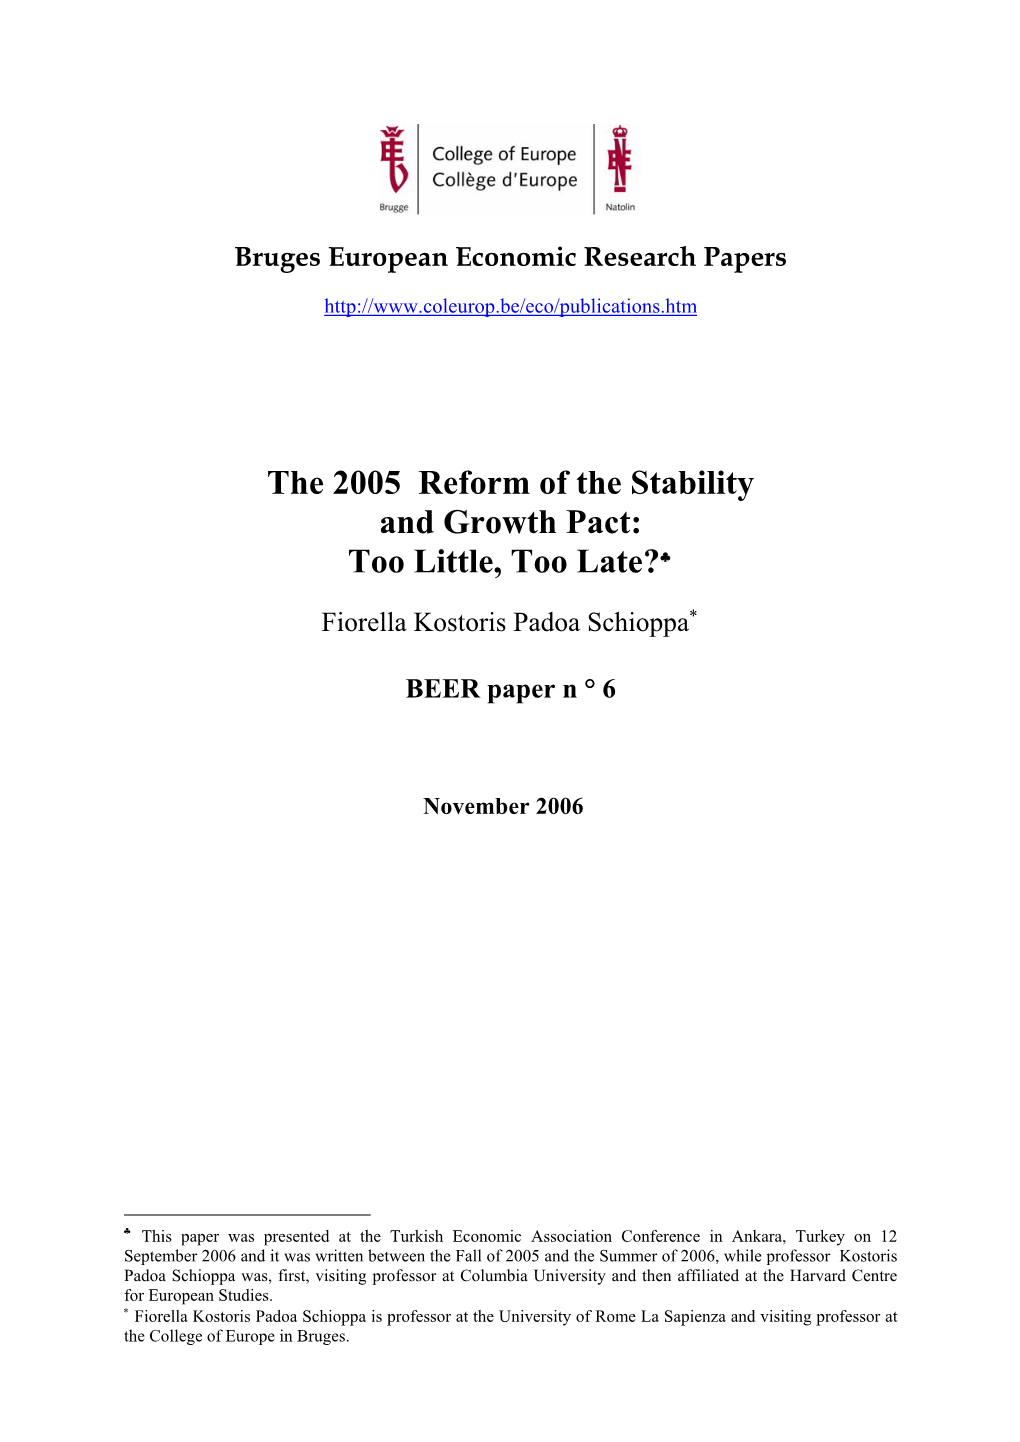 The 2005 Reform of the Stability and Growth Pact: Too Little, Too Late?♣